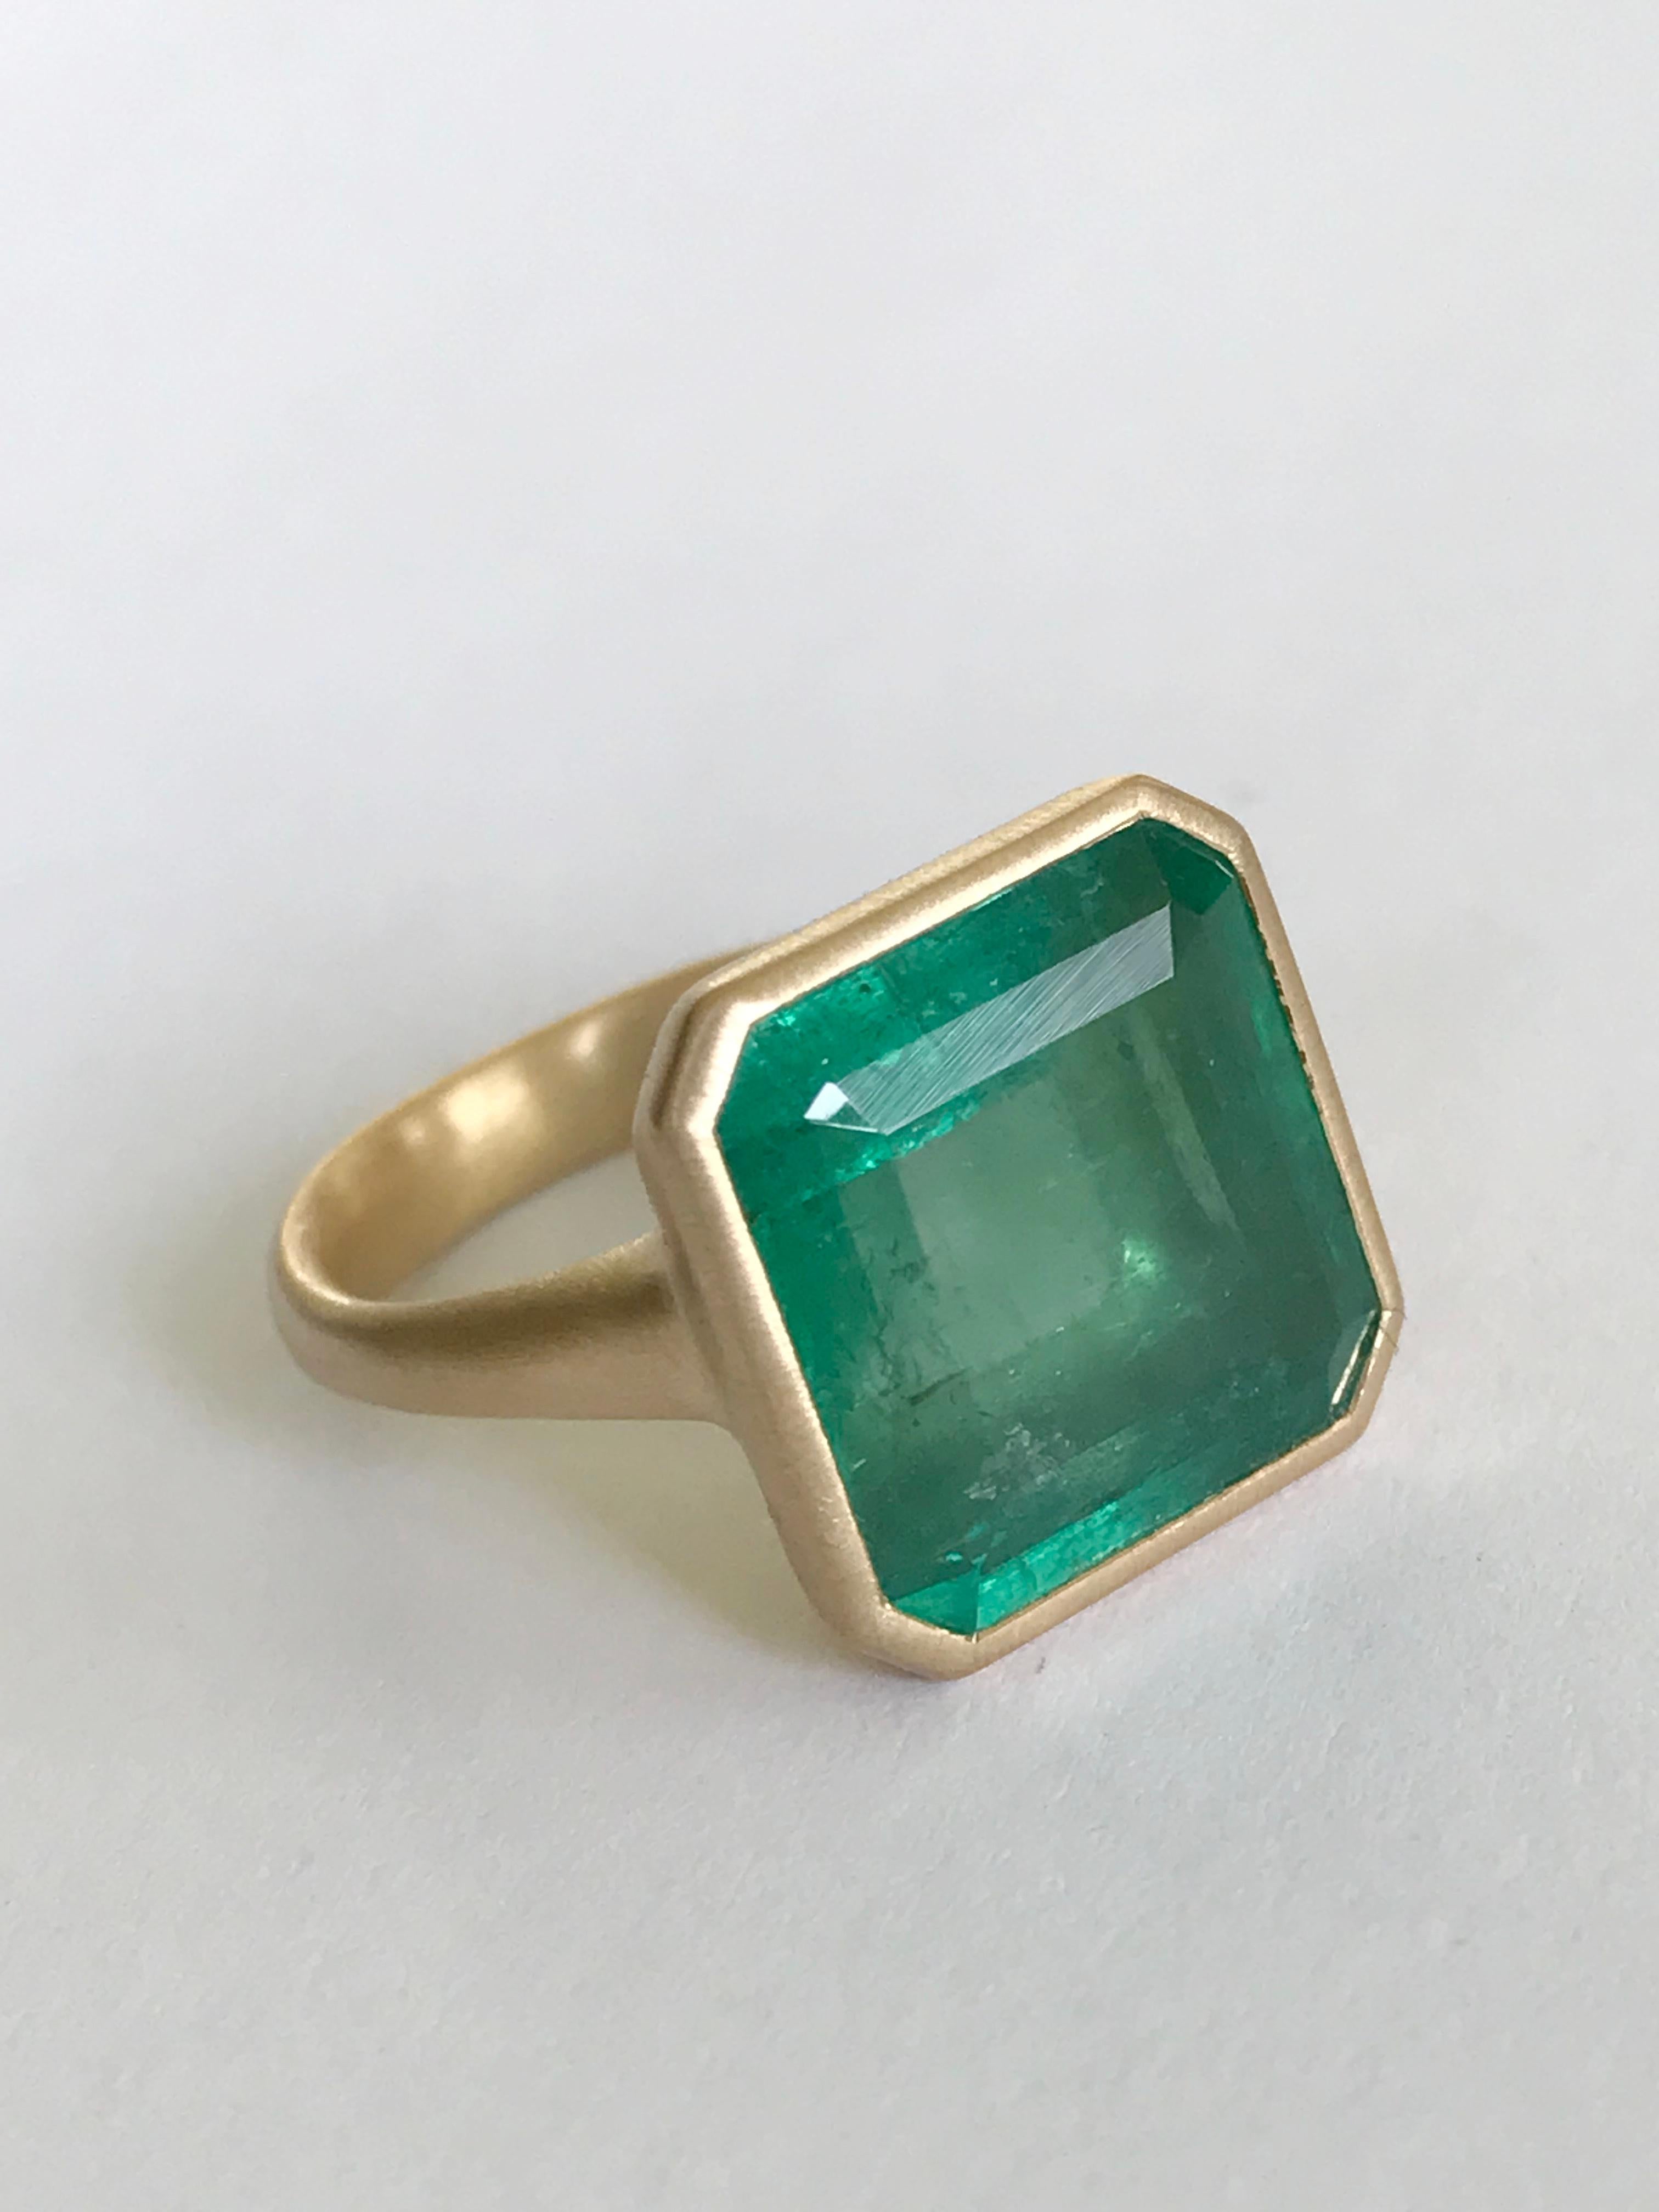 Dalben design One of a Kind 18k yellow gold satin finishing ring with a 10,63 carat bezel-set emerald cut emerald. 
Ring size 7  USA - EU 54 1/2 re-sizable to most finger sizes. 
Bezel stone dimensions :
width 14,5 mm
height 15 mm
The ring has been